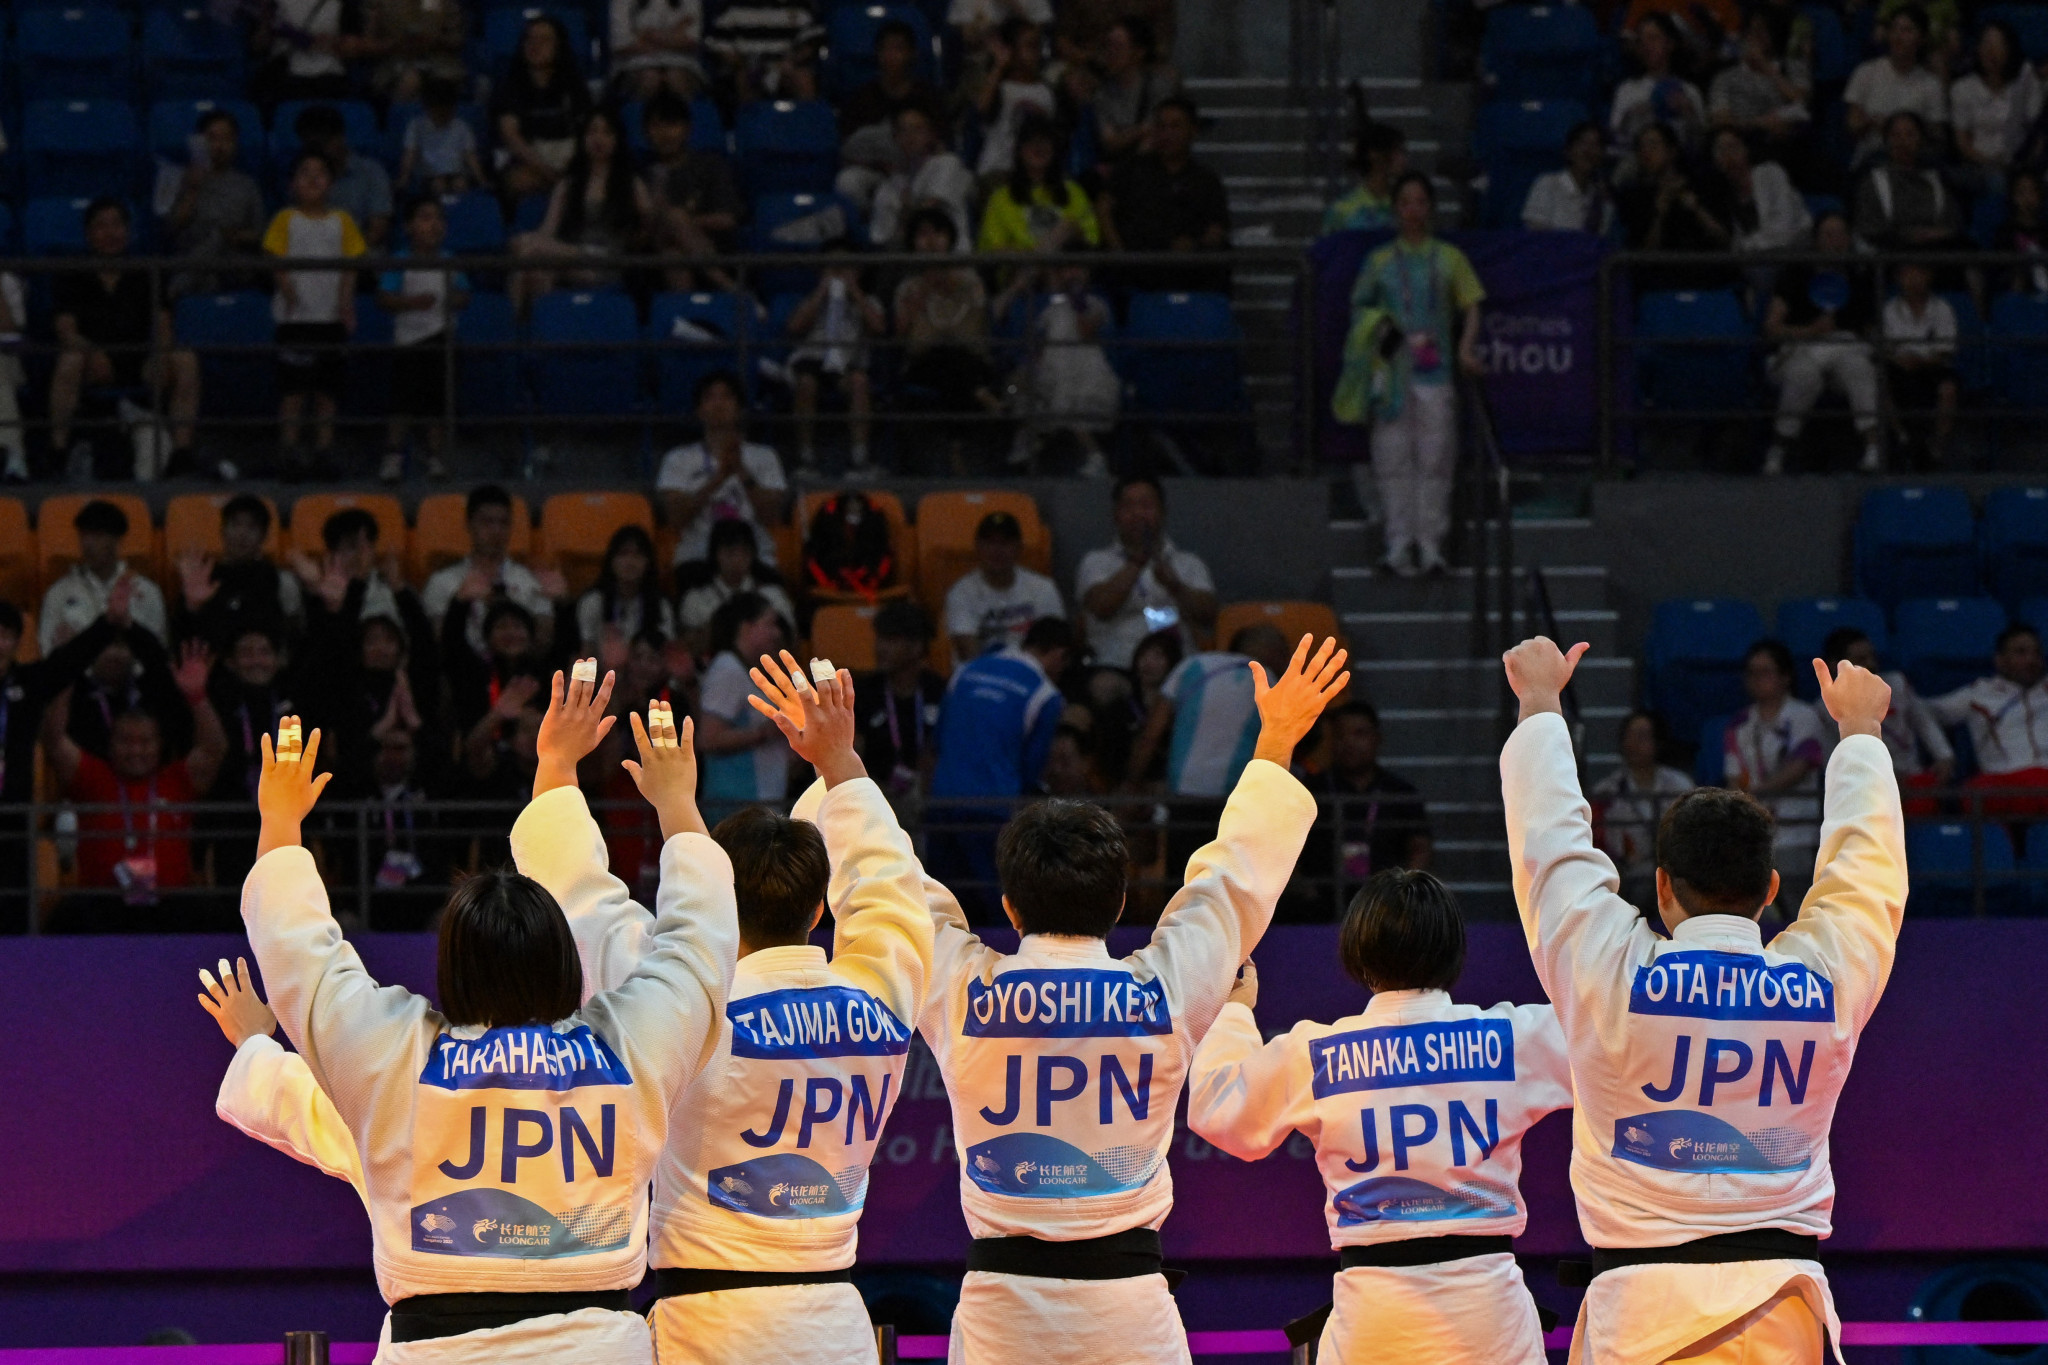 Japan cemented their top dog status in judo with a 4-0 victory against Uzbekistan in the mixed team final ©Getty Images